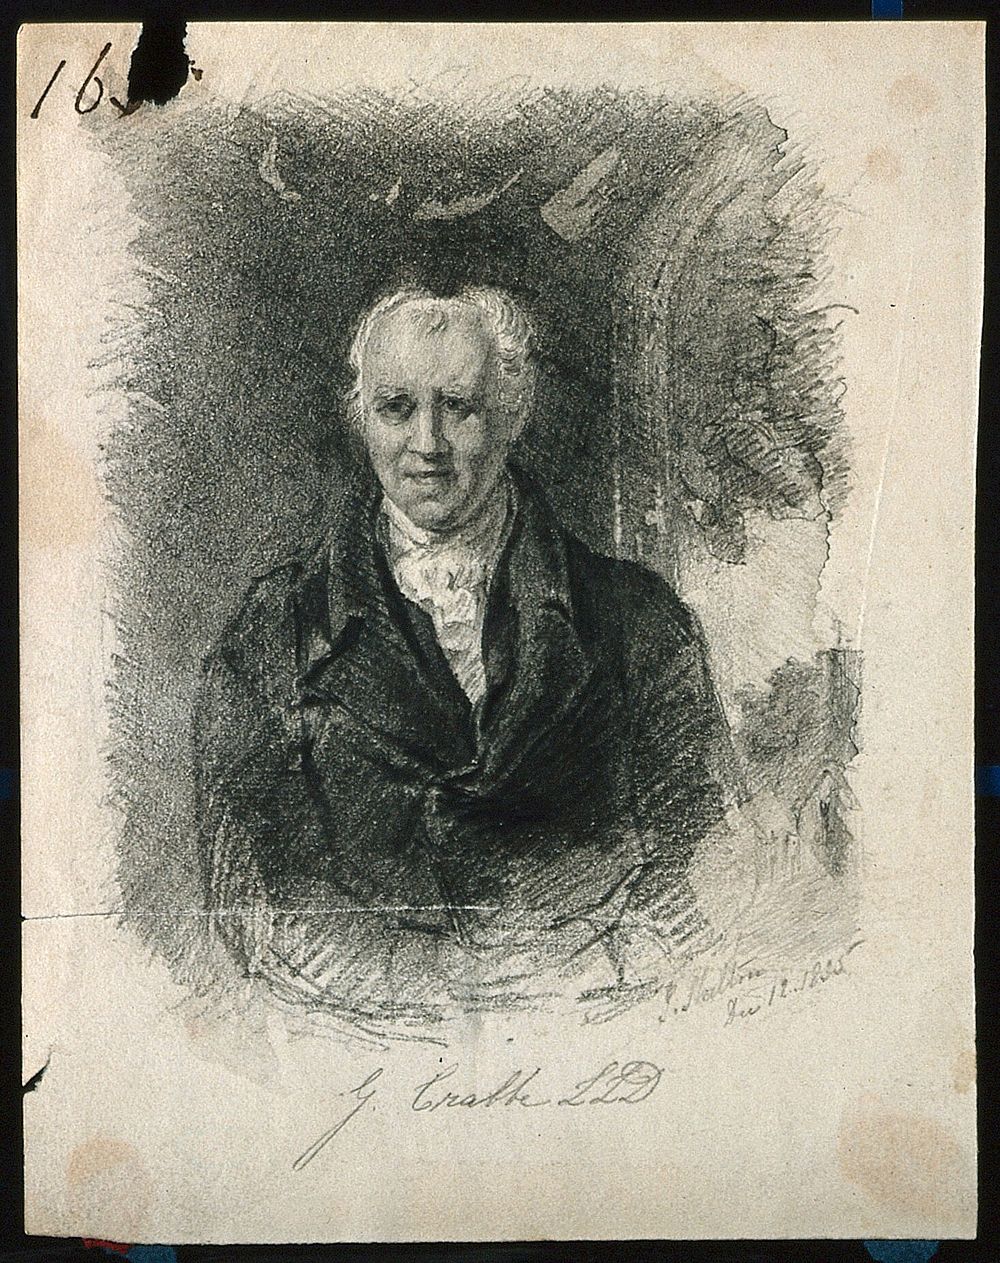 George Crabbe. Pencil drawing by E. Hulton, 1835.